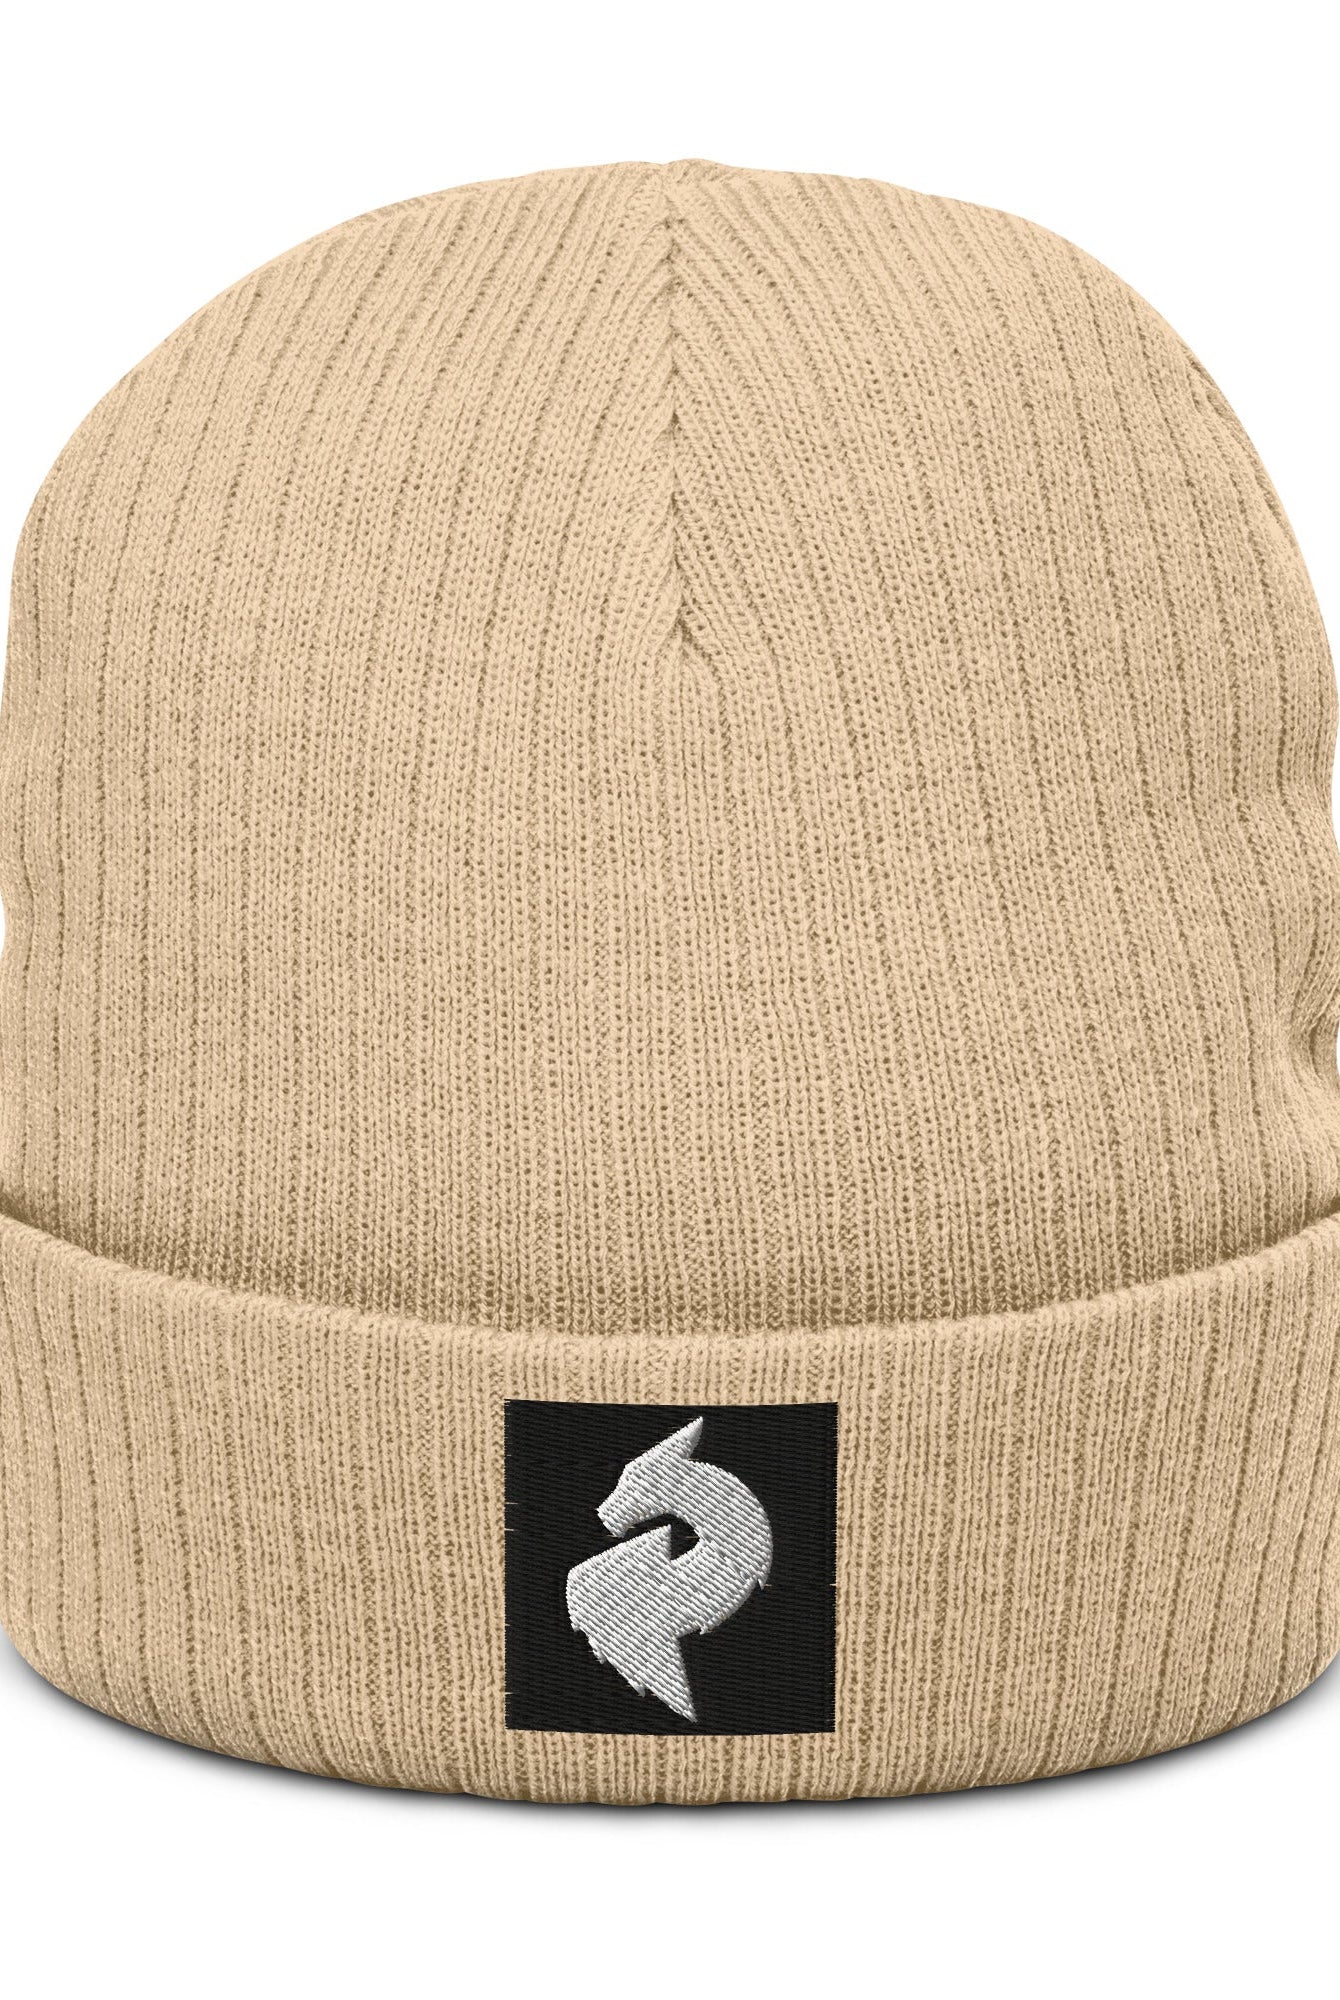 His or Hers Dragon Foxx™ Eco - Ribbed knit beanie - His or Hers Dragon Foxx™ Eco - Ribbed knit beanie - DRAGON FOXX™ - His or Hers Dragon Foxx™ Eco - Ribbed knit beanie - 2867494_15016 - Beige - - Accessories - Acid Green Eco - Ribbed knit beanie - Beanie